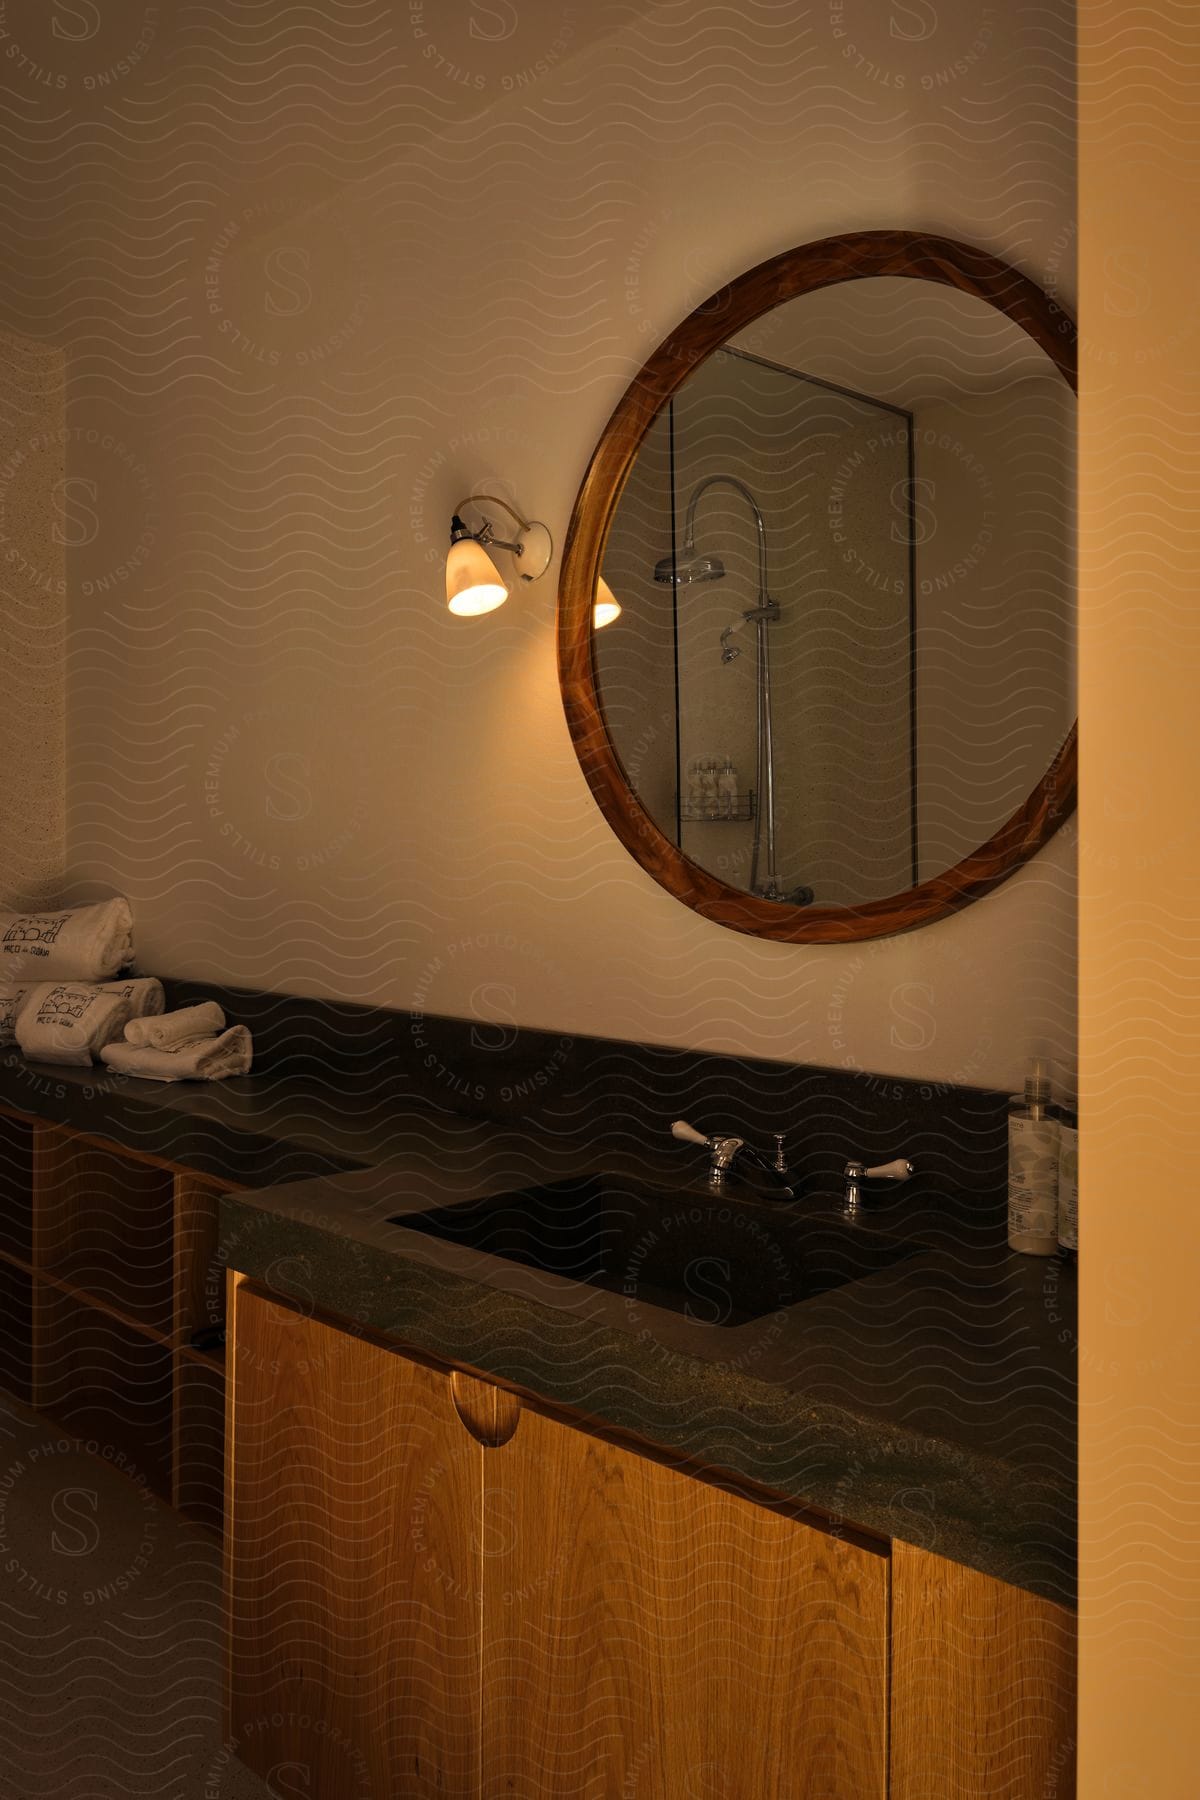 A bathroom with a dark marble sink and an oval mirror on the wall reflecting the image of the shower